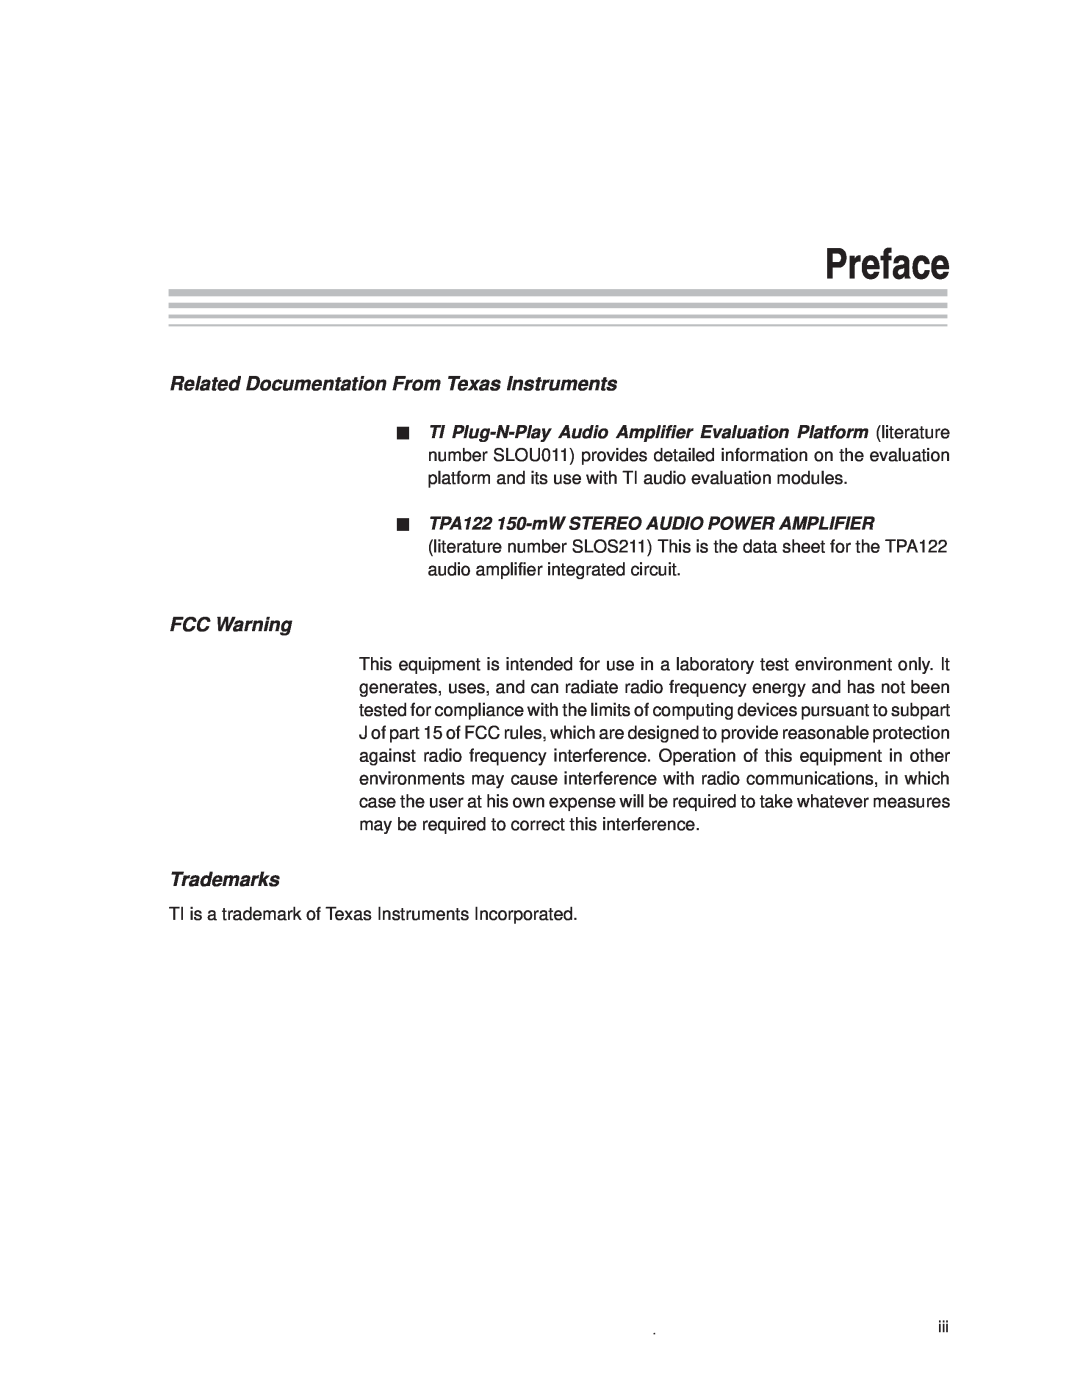 Texas Instruments SLOU025 manual Preface, Related Documentation From Texas Instruments, FCC Warning, Trademarks 